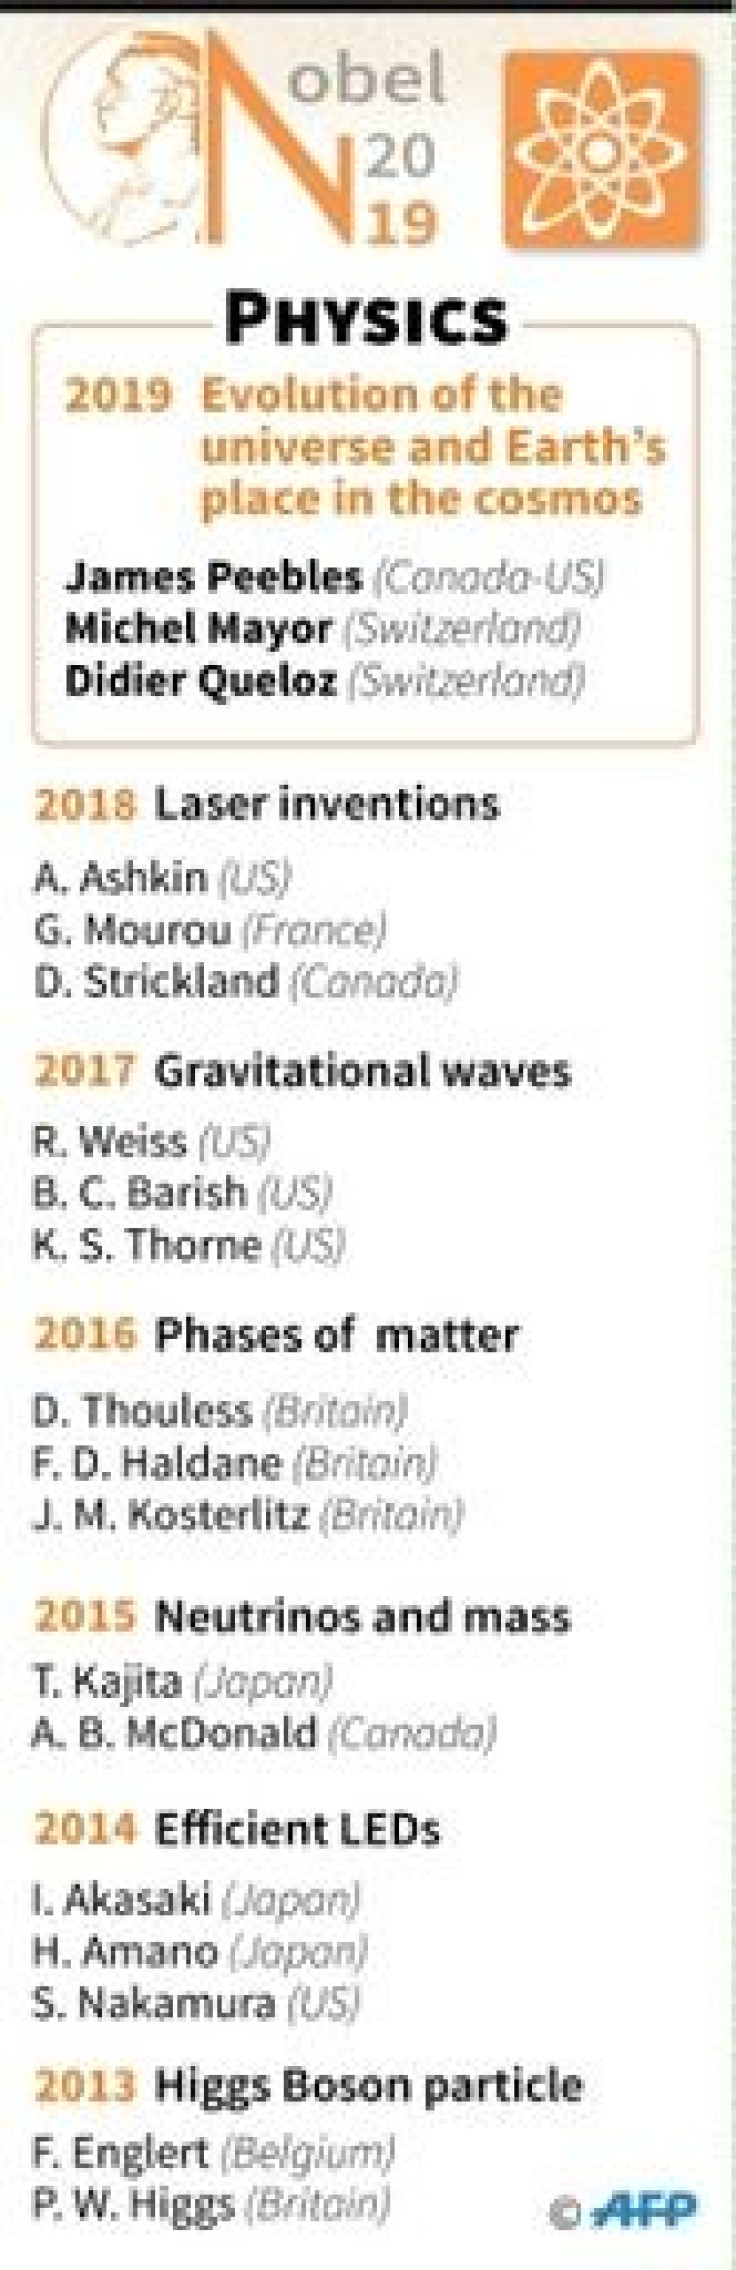 The winners of the Nobel prize for physics since 2013